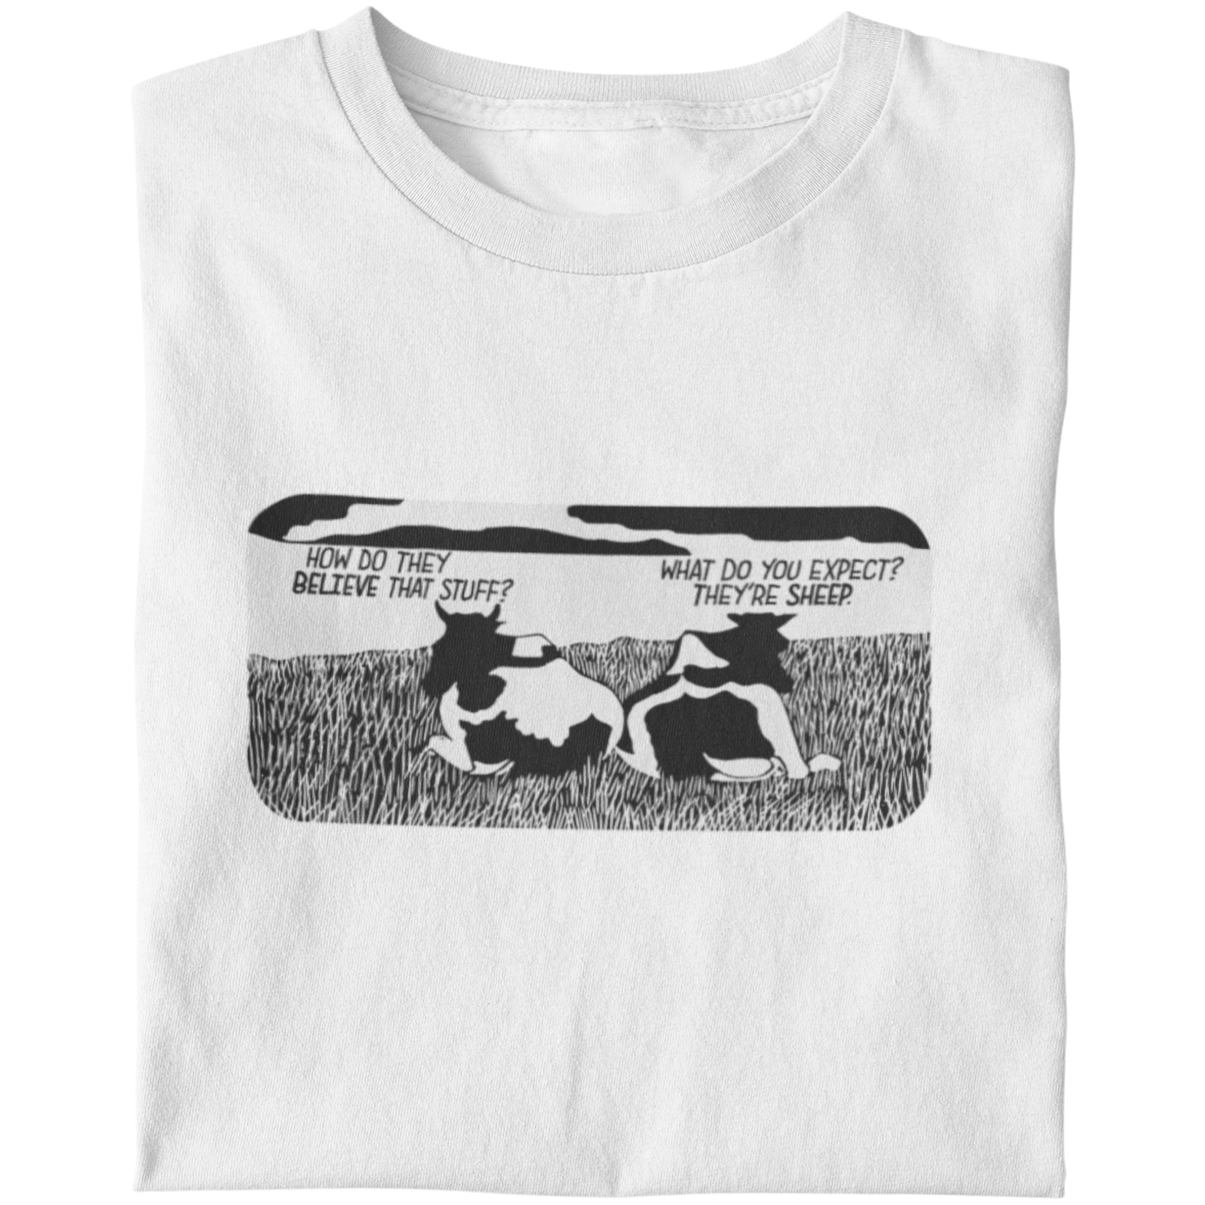 They're Sheep - Unisex T-Shirt